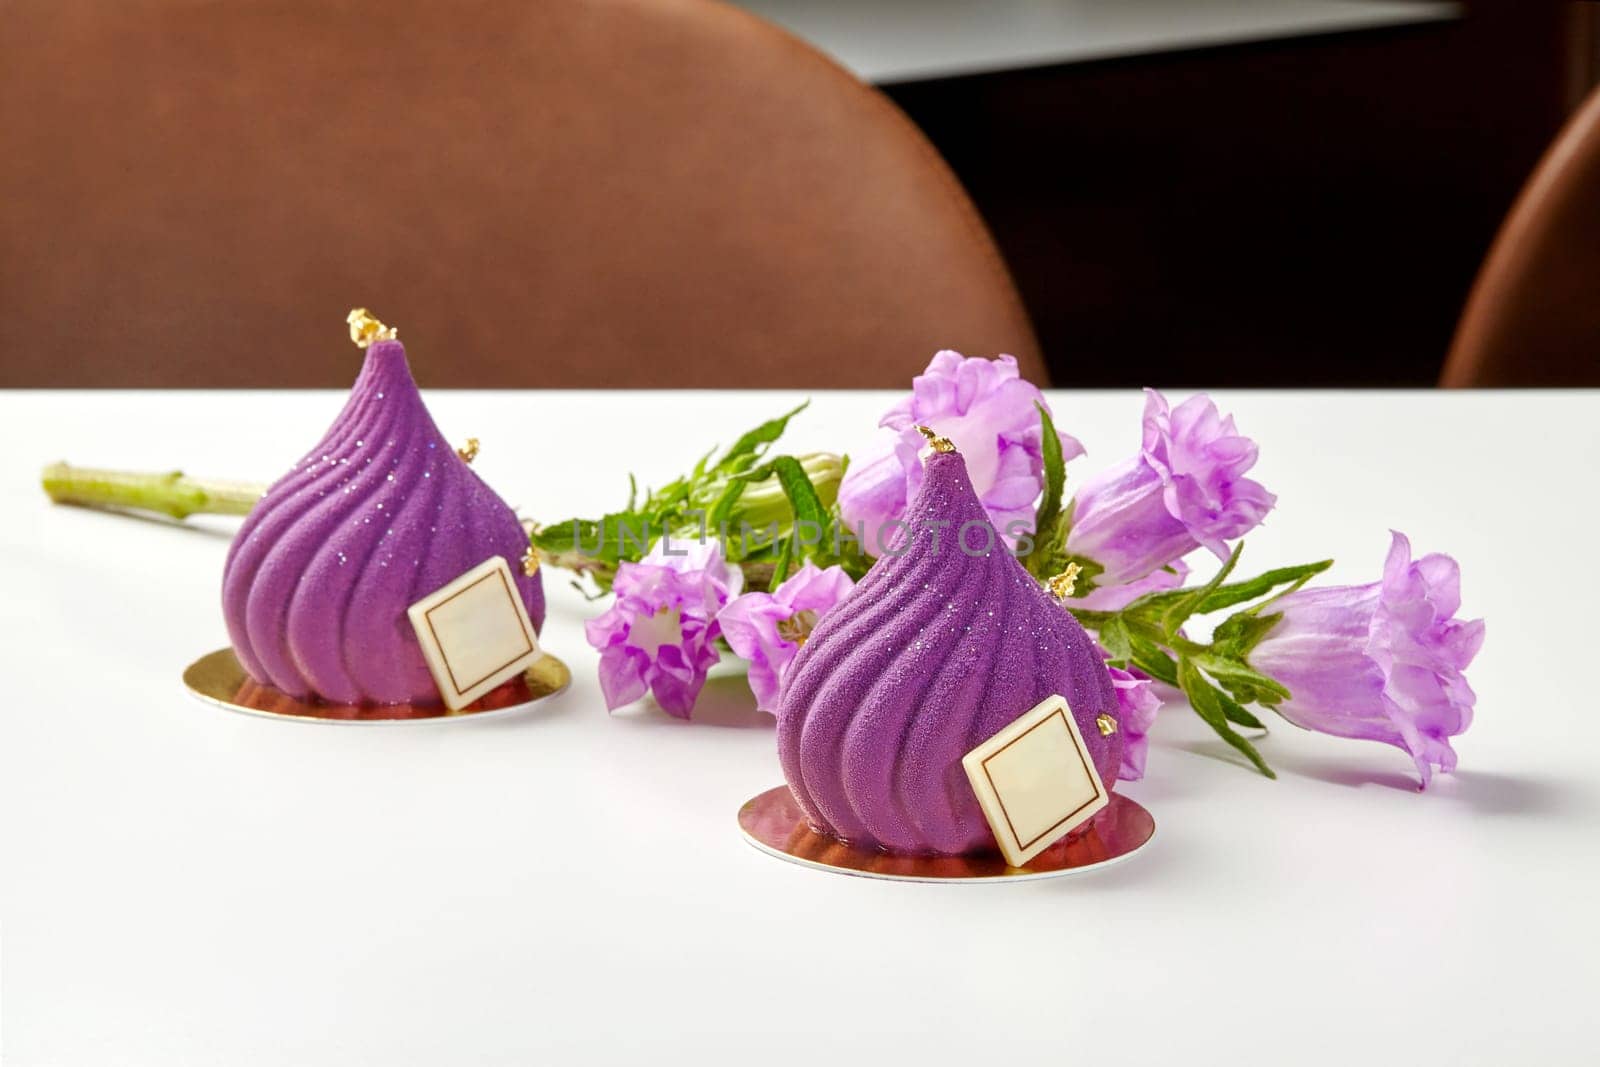 Twin purple mousse desserts in shape of swirls adorned with gold leaf and branded chocolate plaque, presented with fresh purple flowers